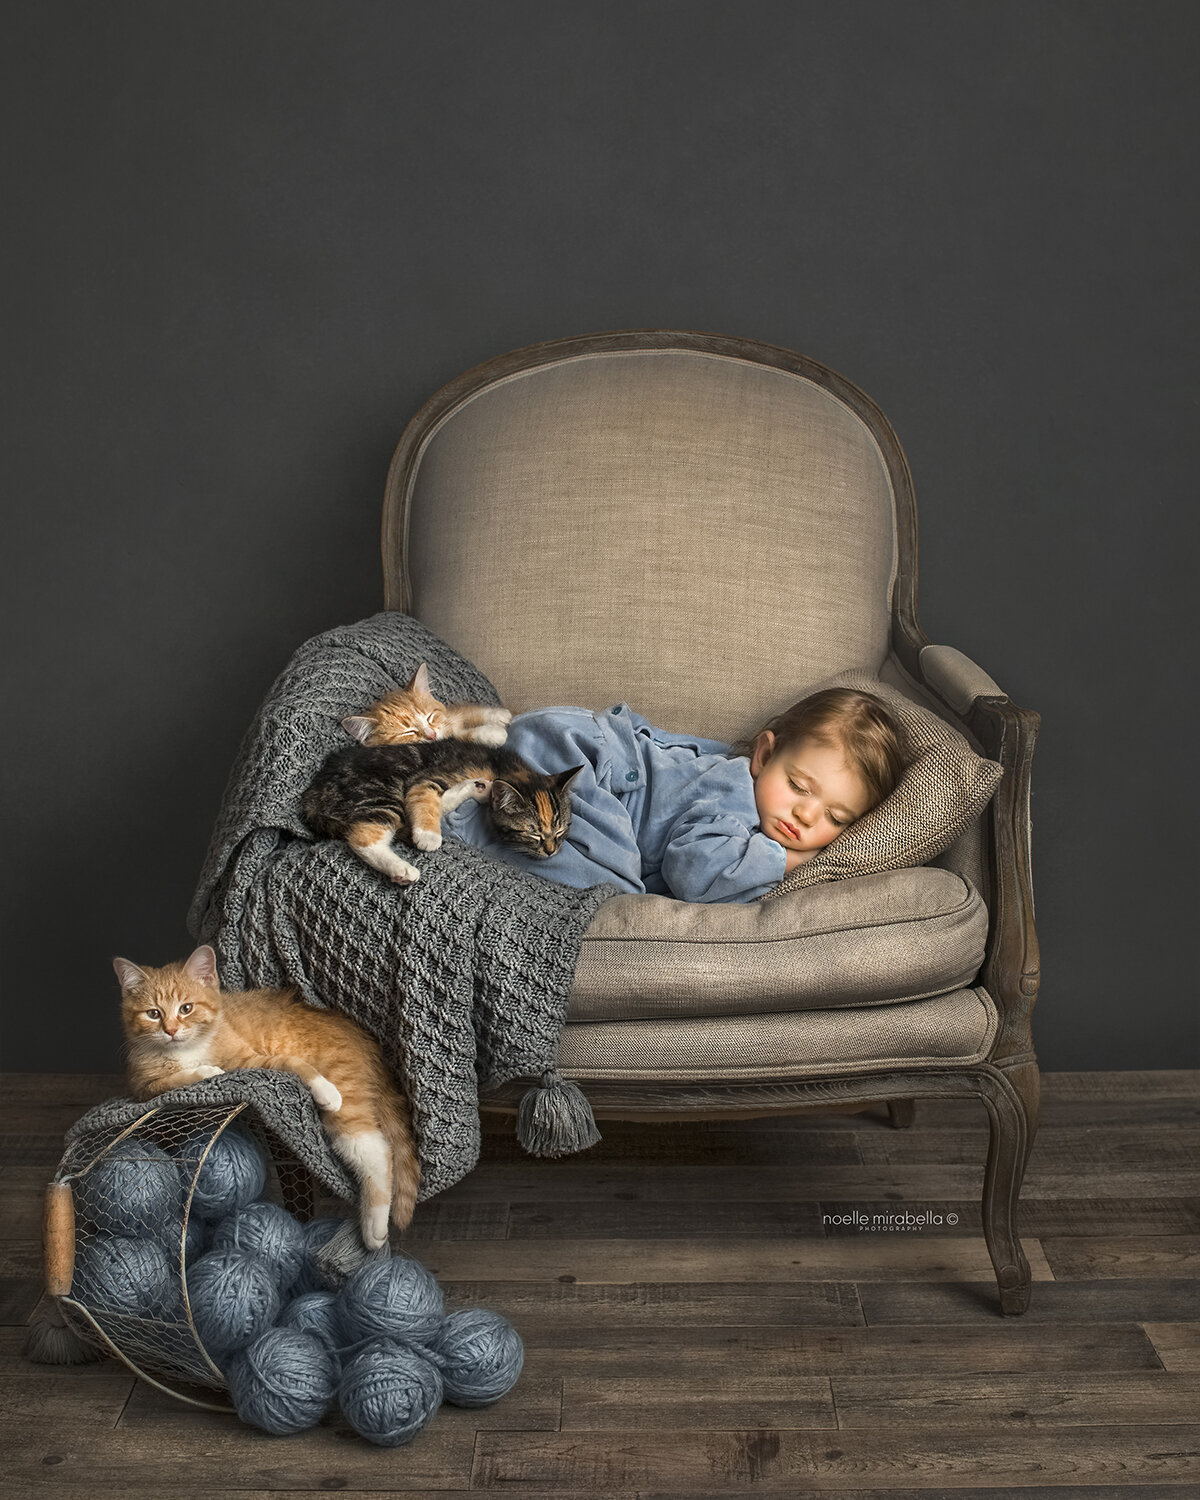 Baby in blue vintage pajamas sleeping on chair with kittens.